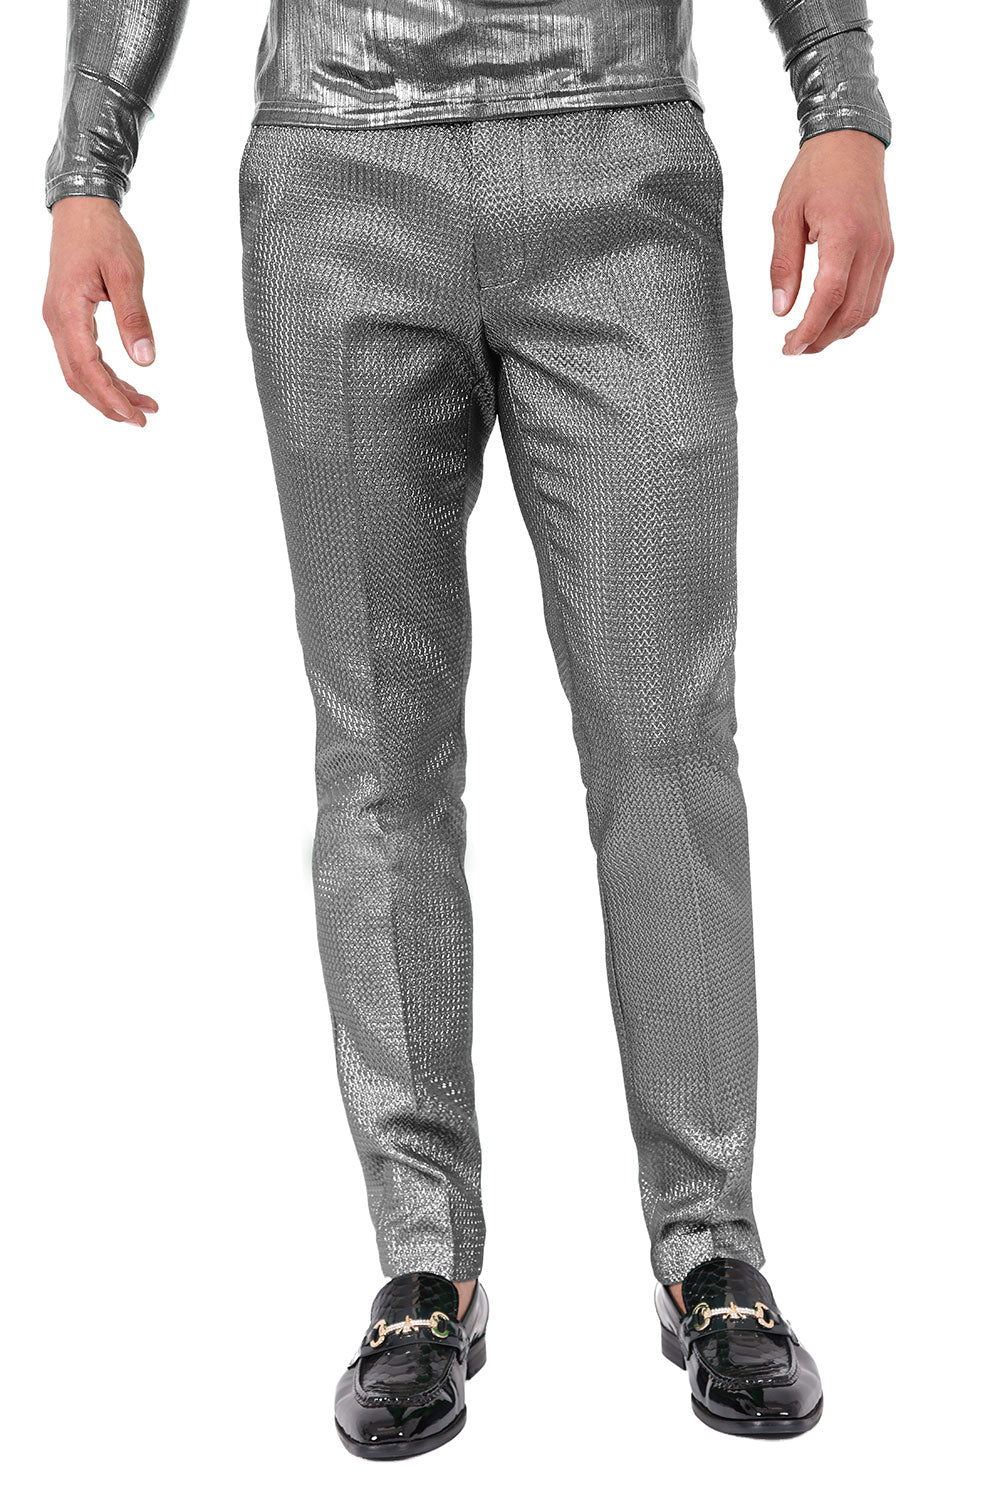 Barabas Men's Solid Vibrant Color Luxury Chino Pants 2cp3105 Silver